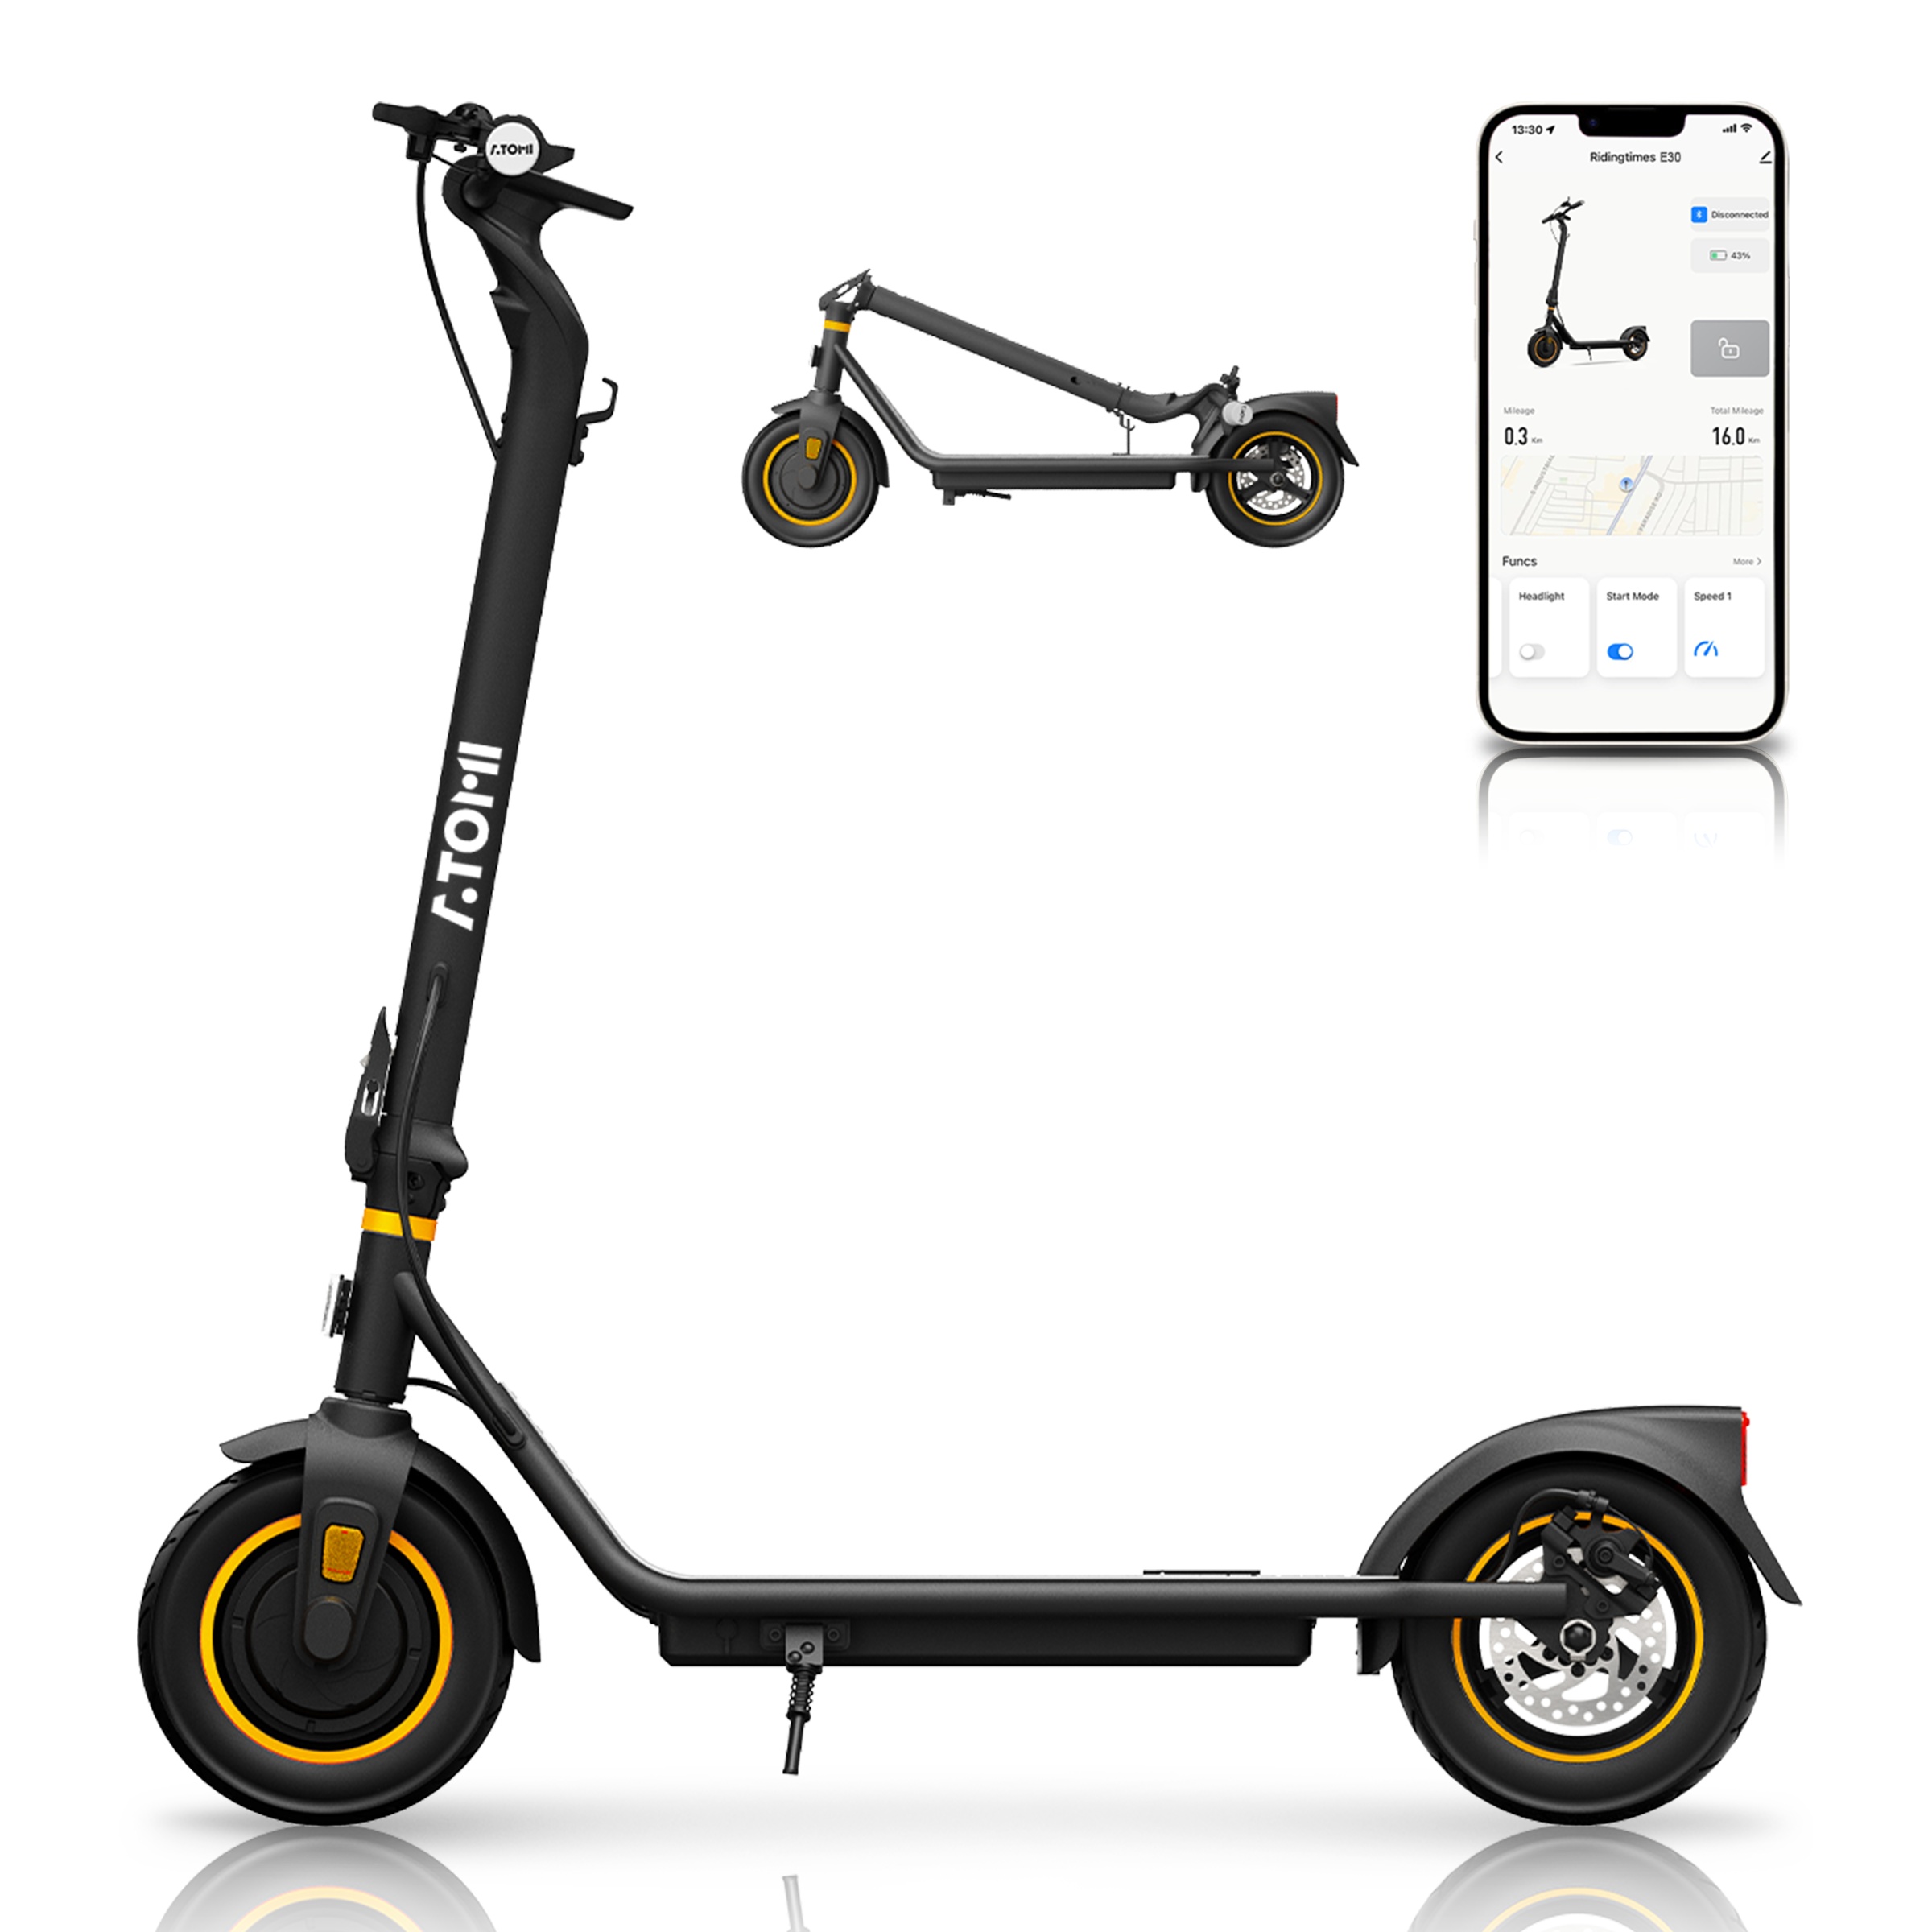 

E30 Electric Scooter - 650w Max Motor, 19-mile Long Range, 15.6 Mph Speed, 10-inch Tire, Foldable Commuter Scooter For Adults With Double Braking System And Smart App